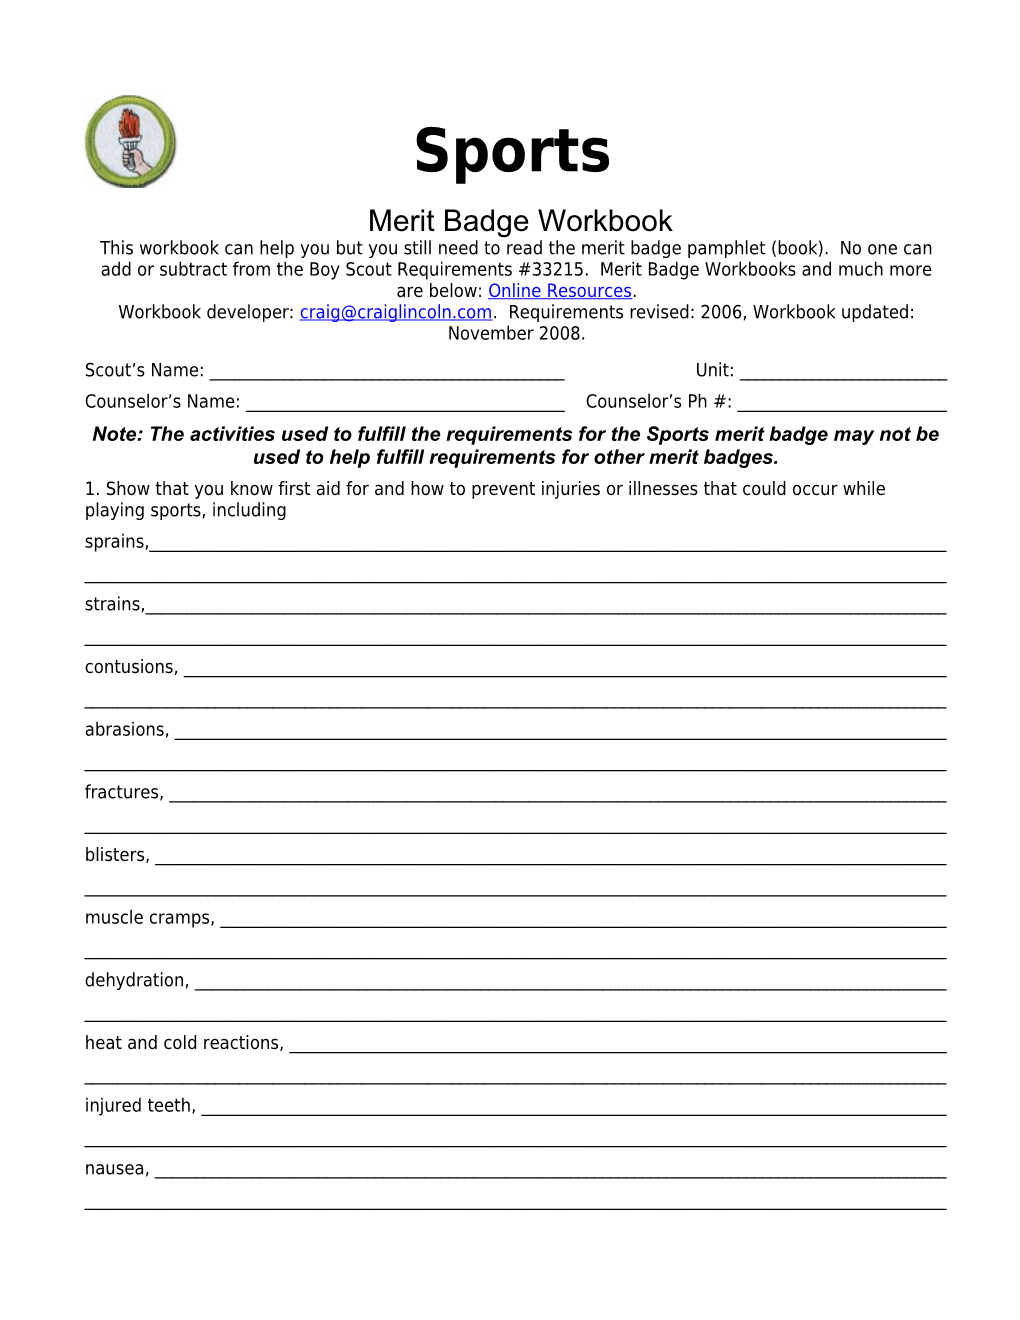 Sports P. 7 Merit Badge Workbook Scout's Name: ______